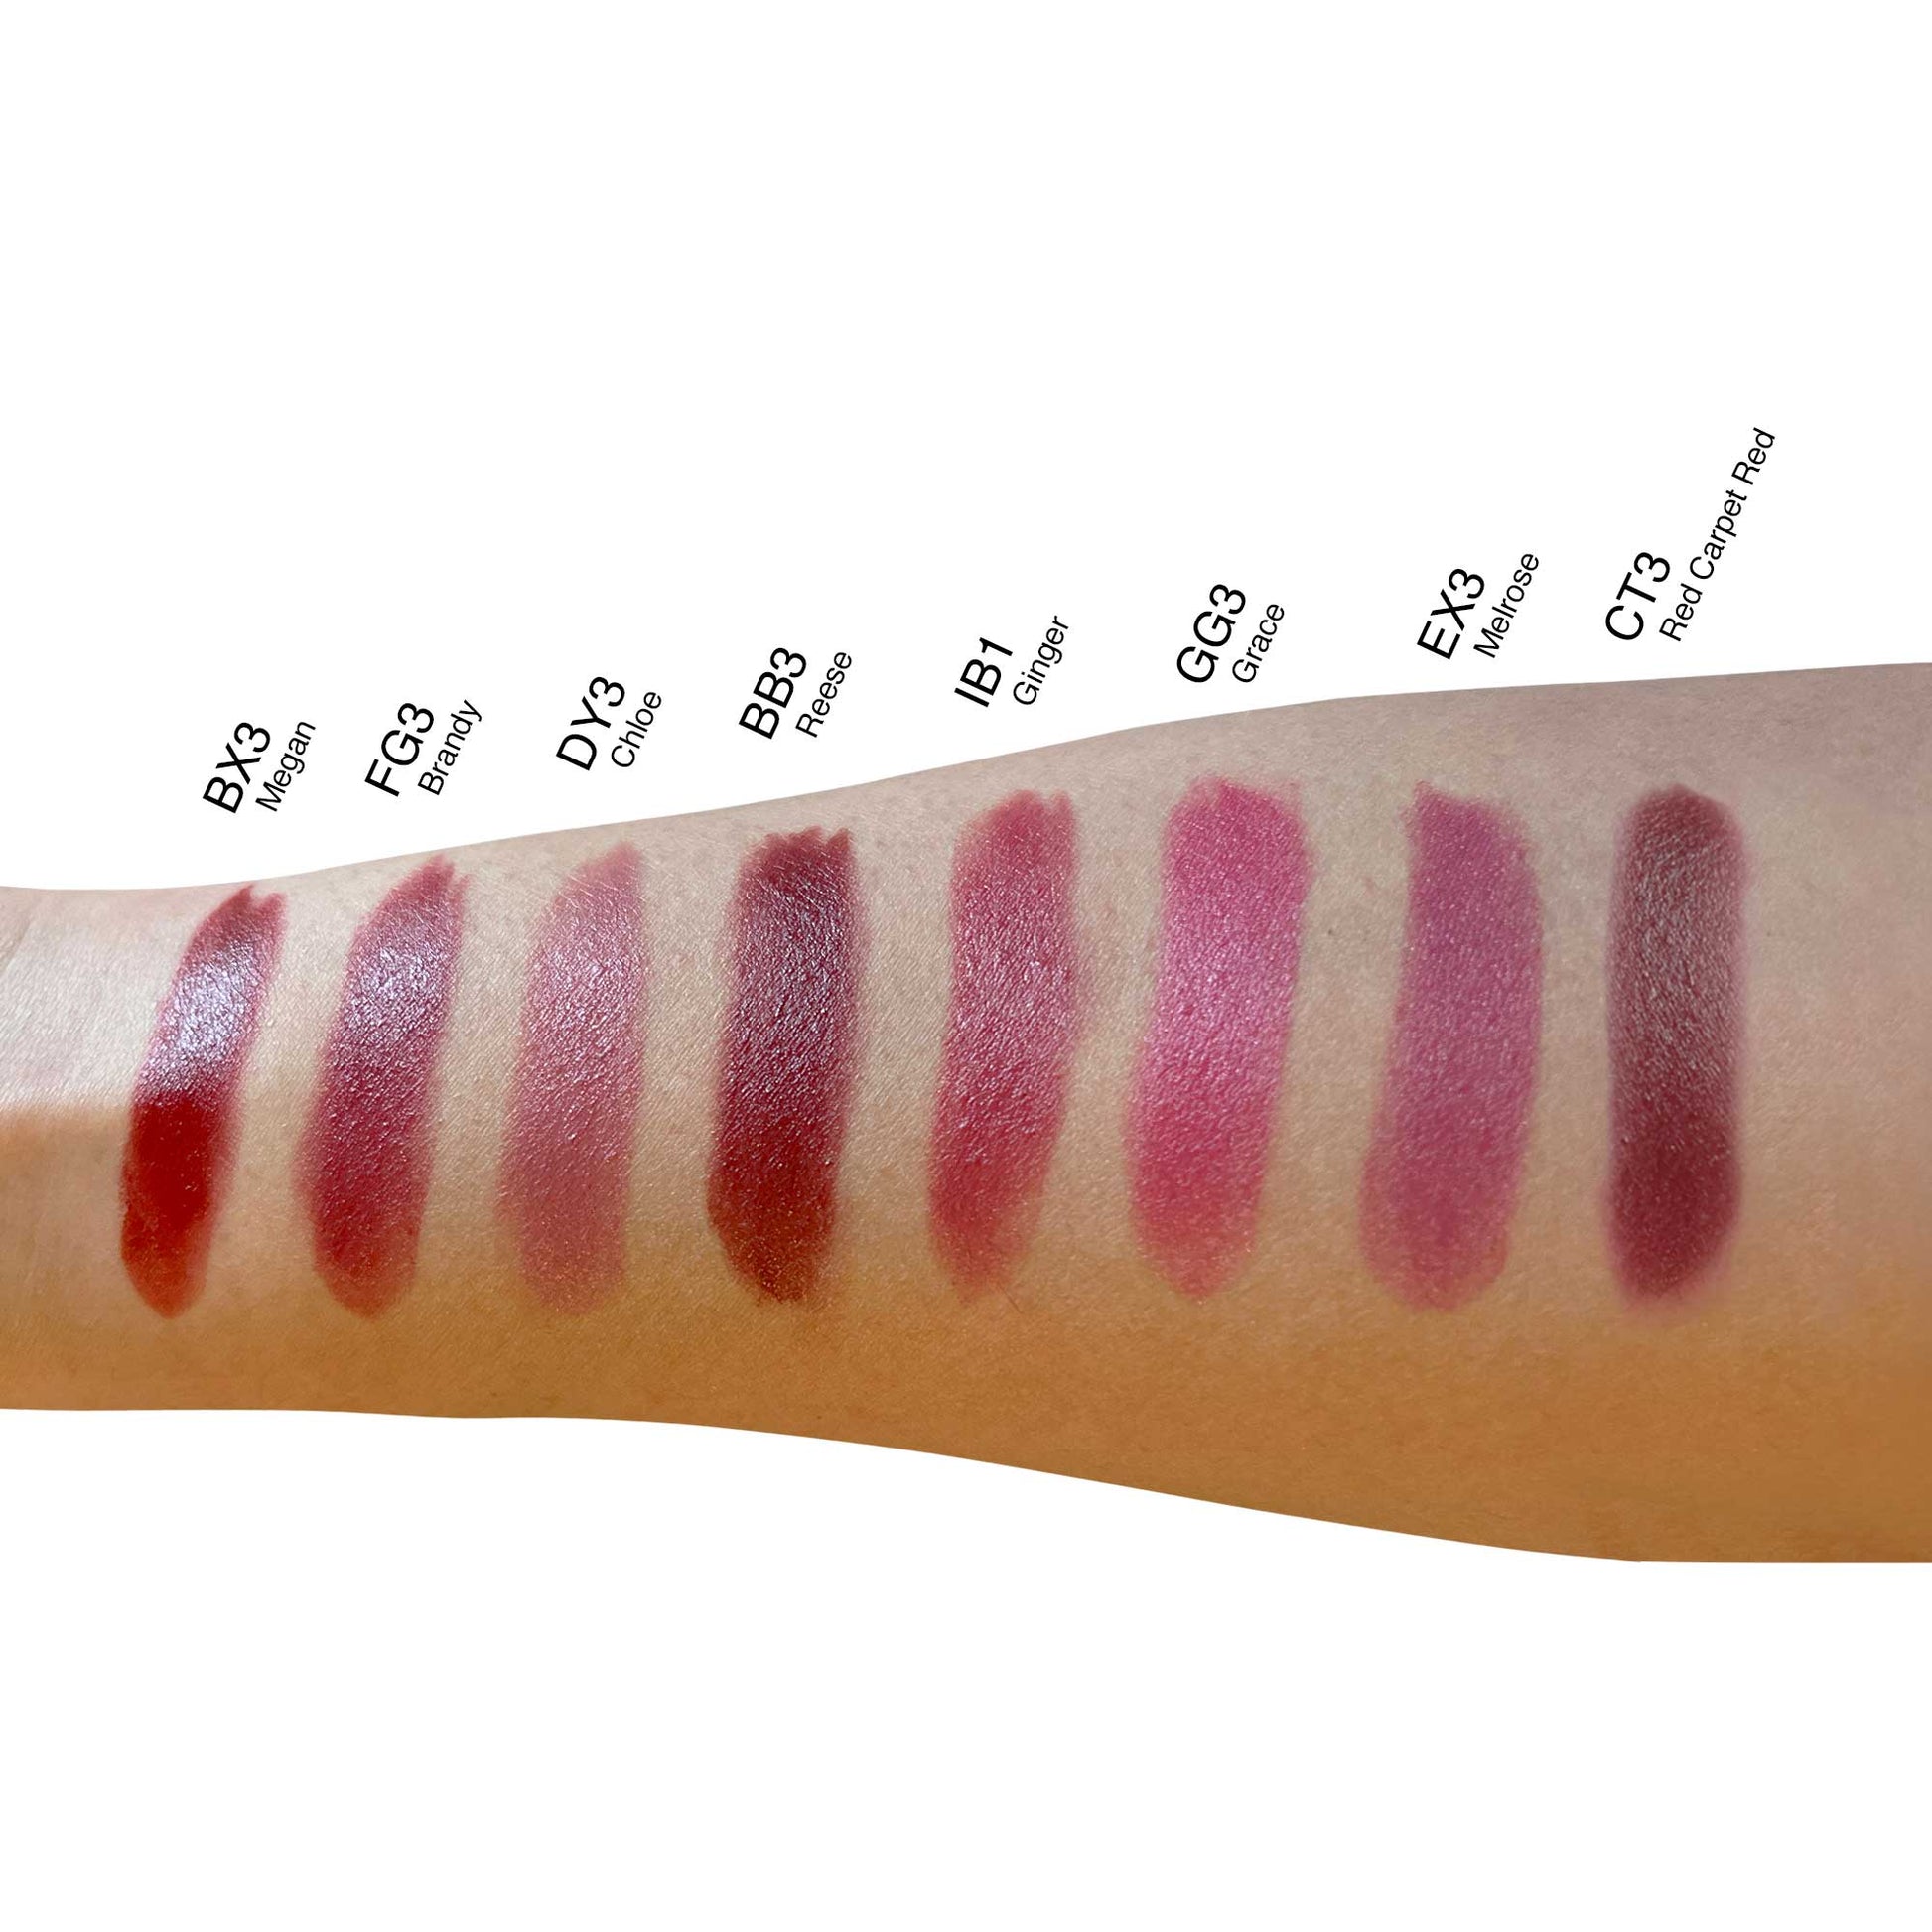 Melrose Matte Lipstick by Cruisin Organics. An explosion of new matte lipstick collections. There are nine options available from your Melrose Place.